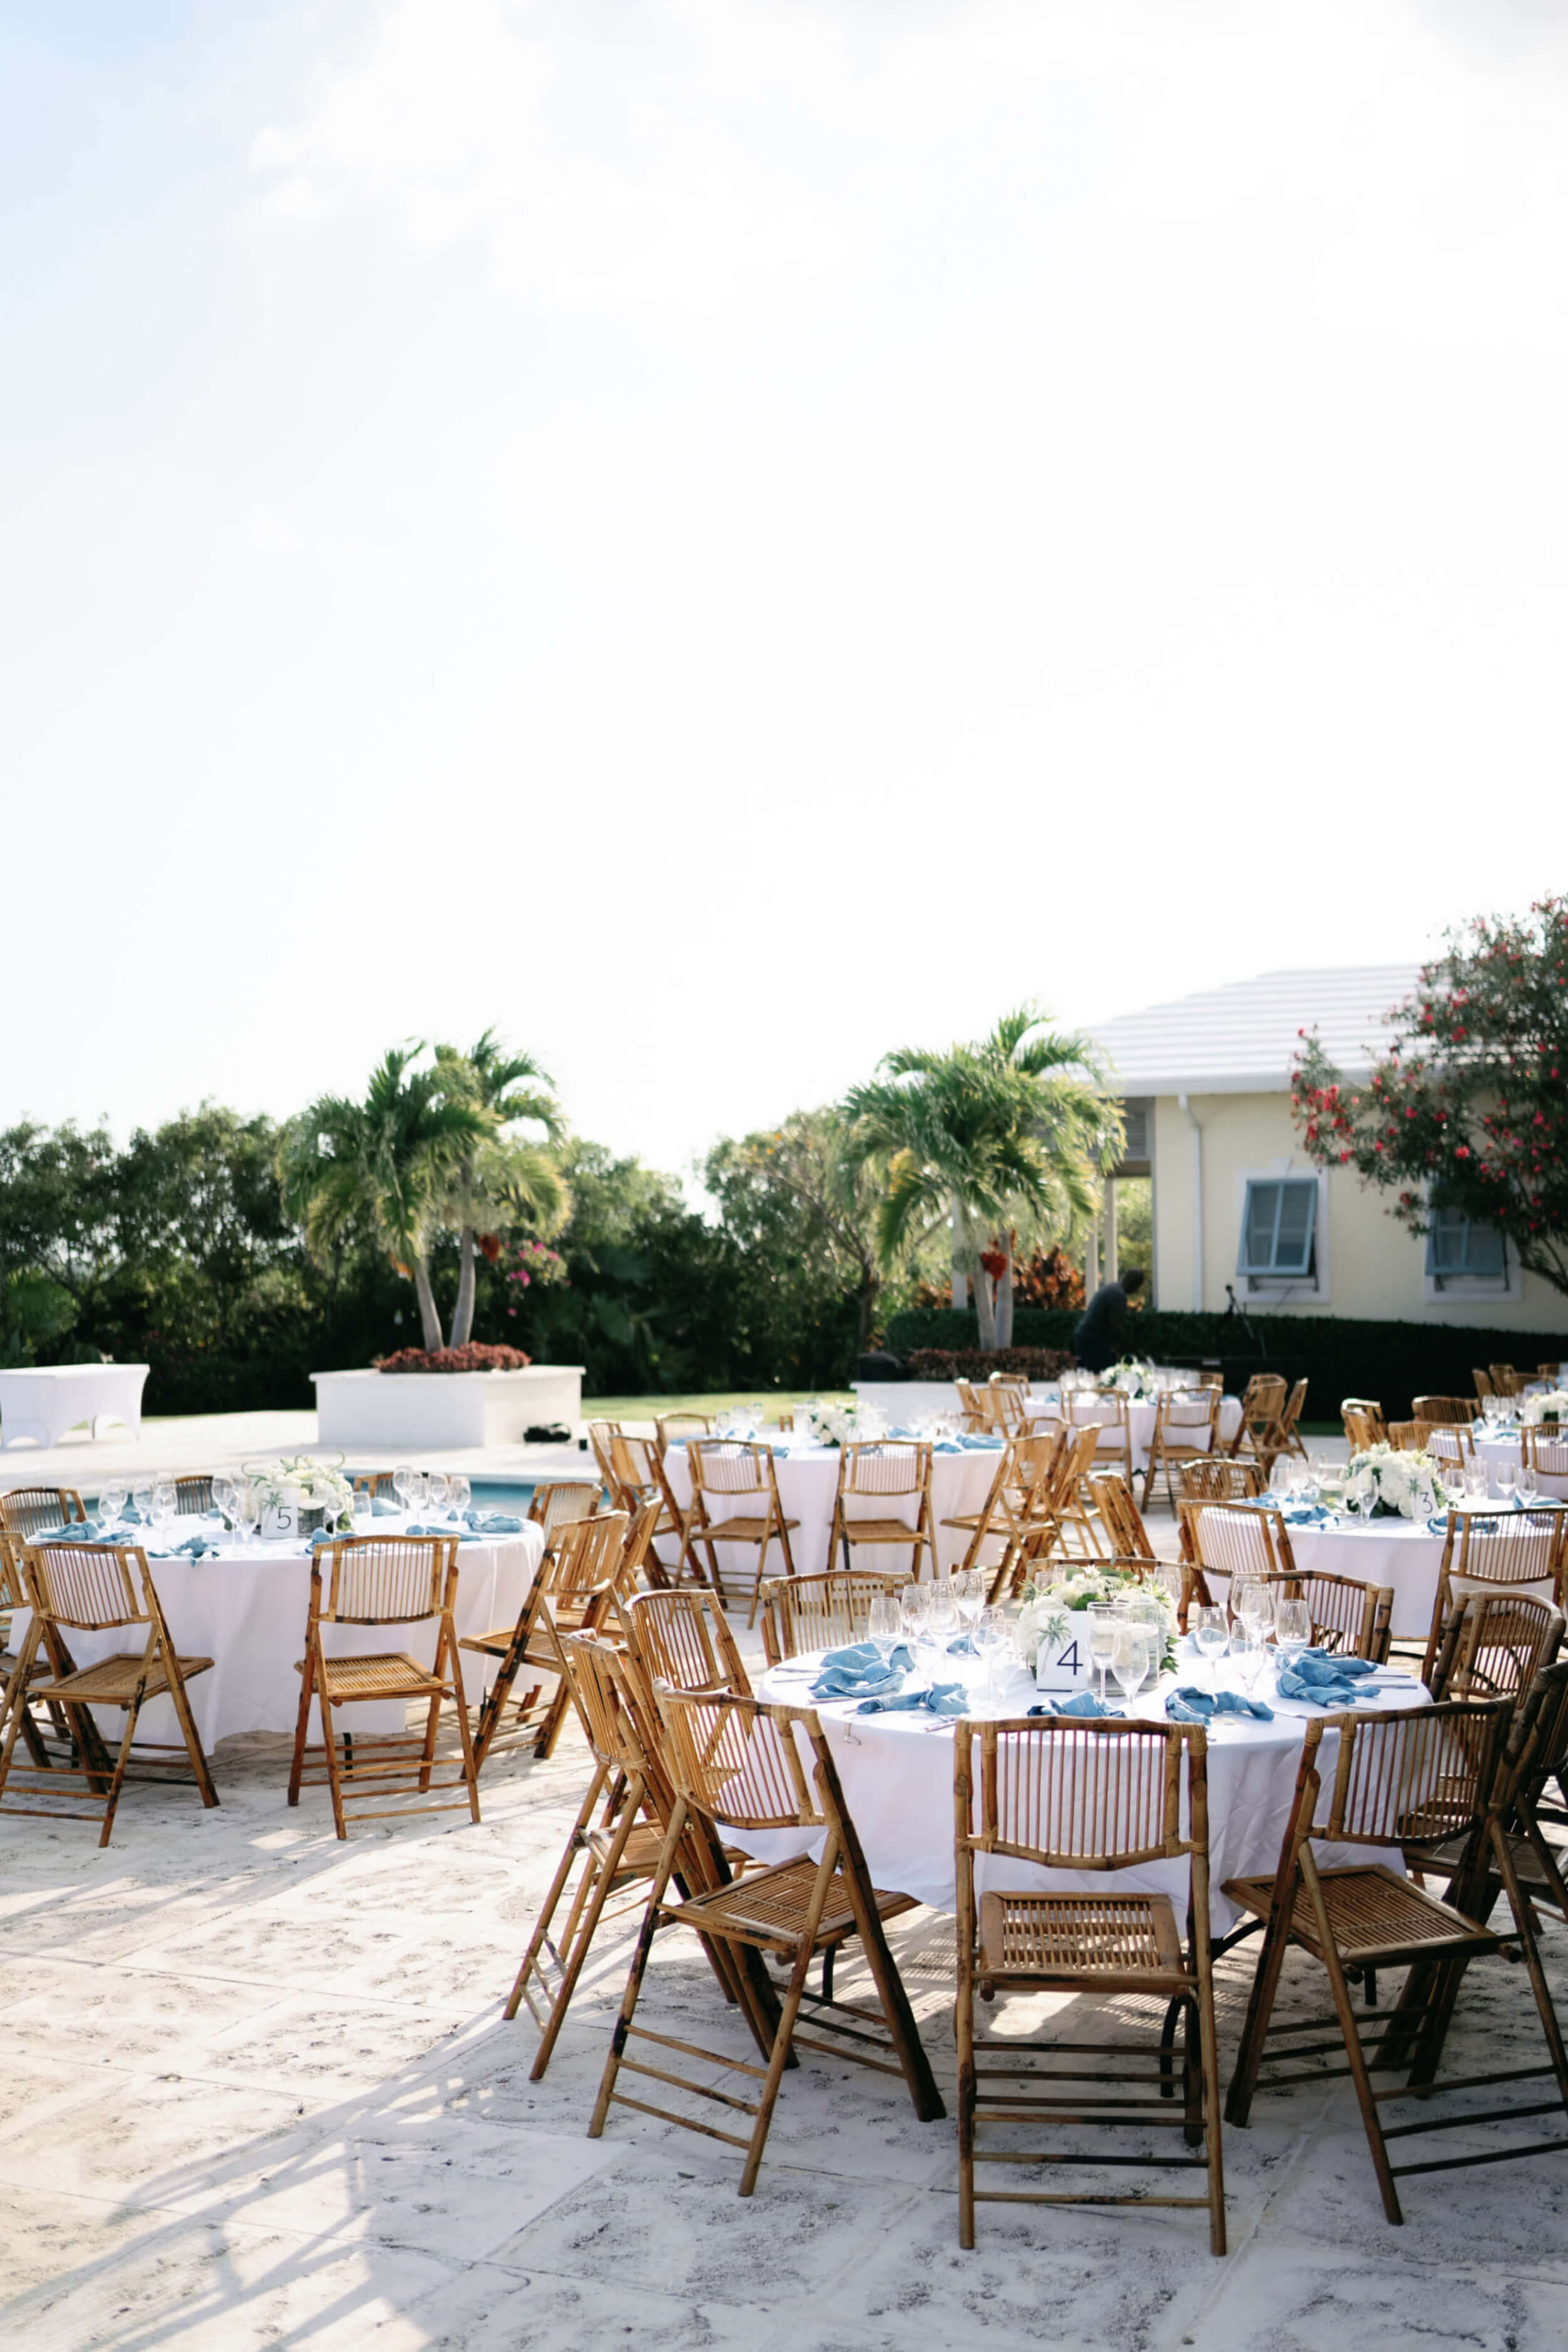 Elegant outdoor dining setup at The Abaco Club, capturing the essence of a luxurious coastal living environment